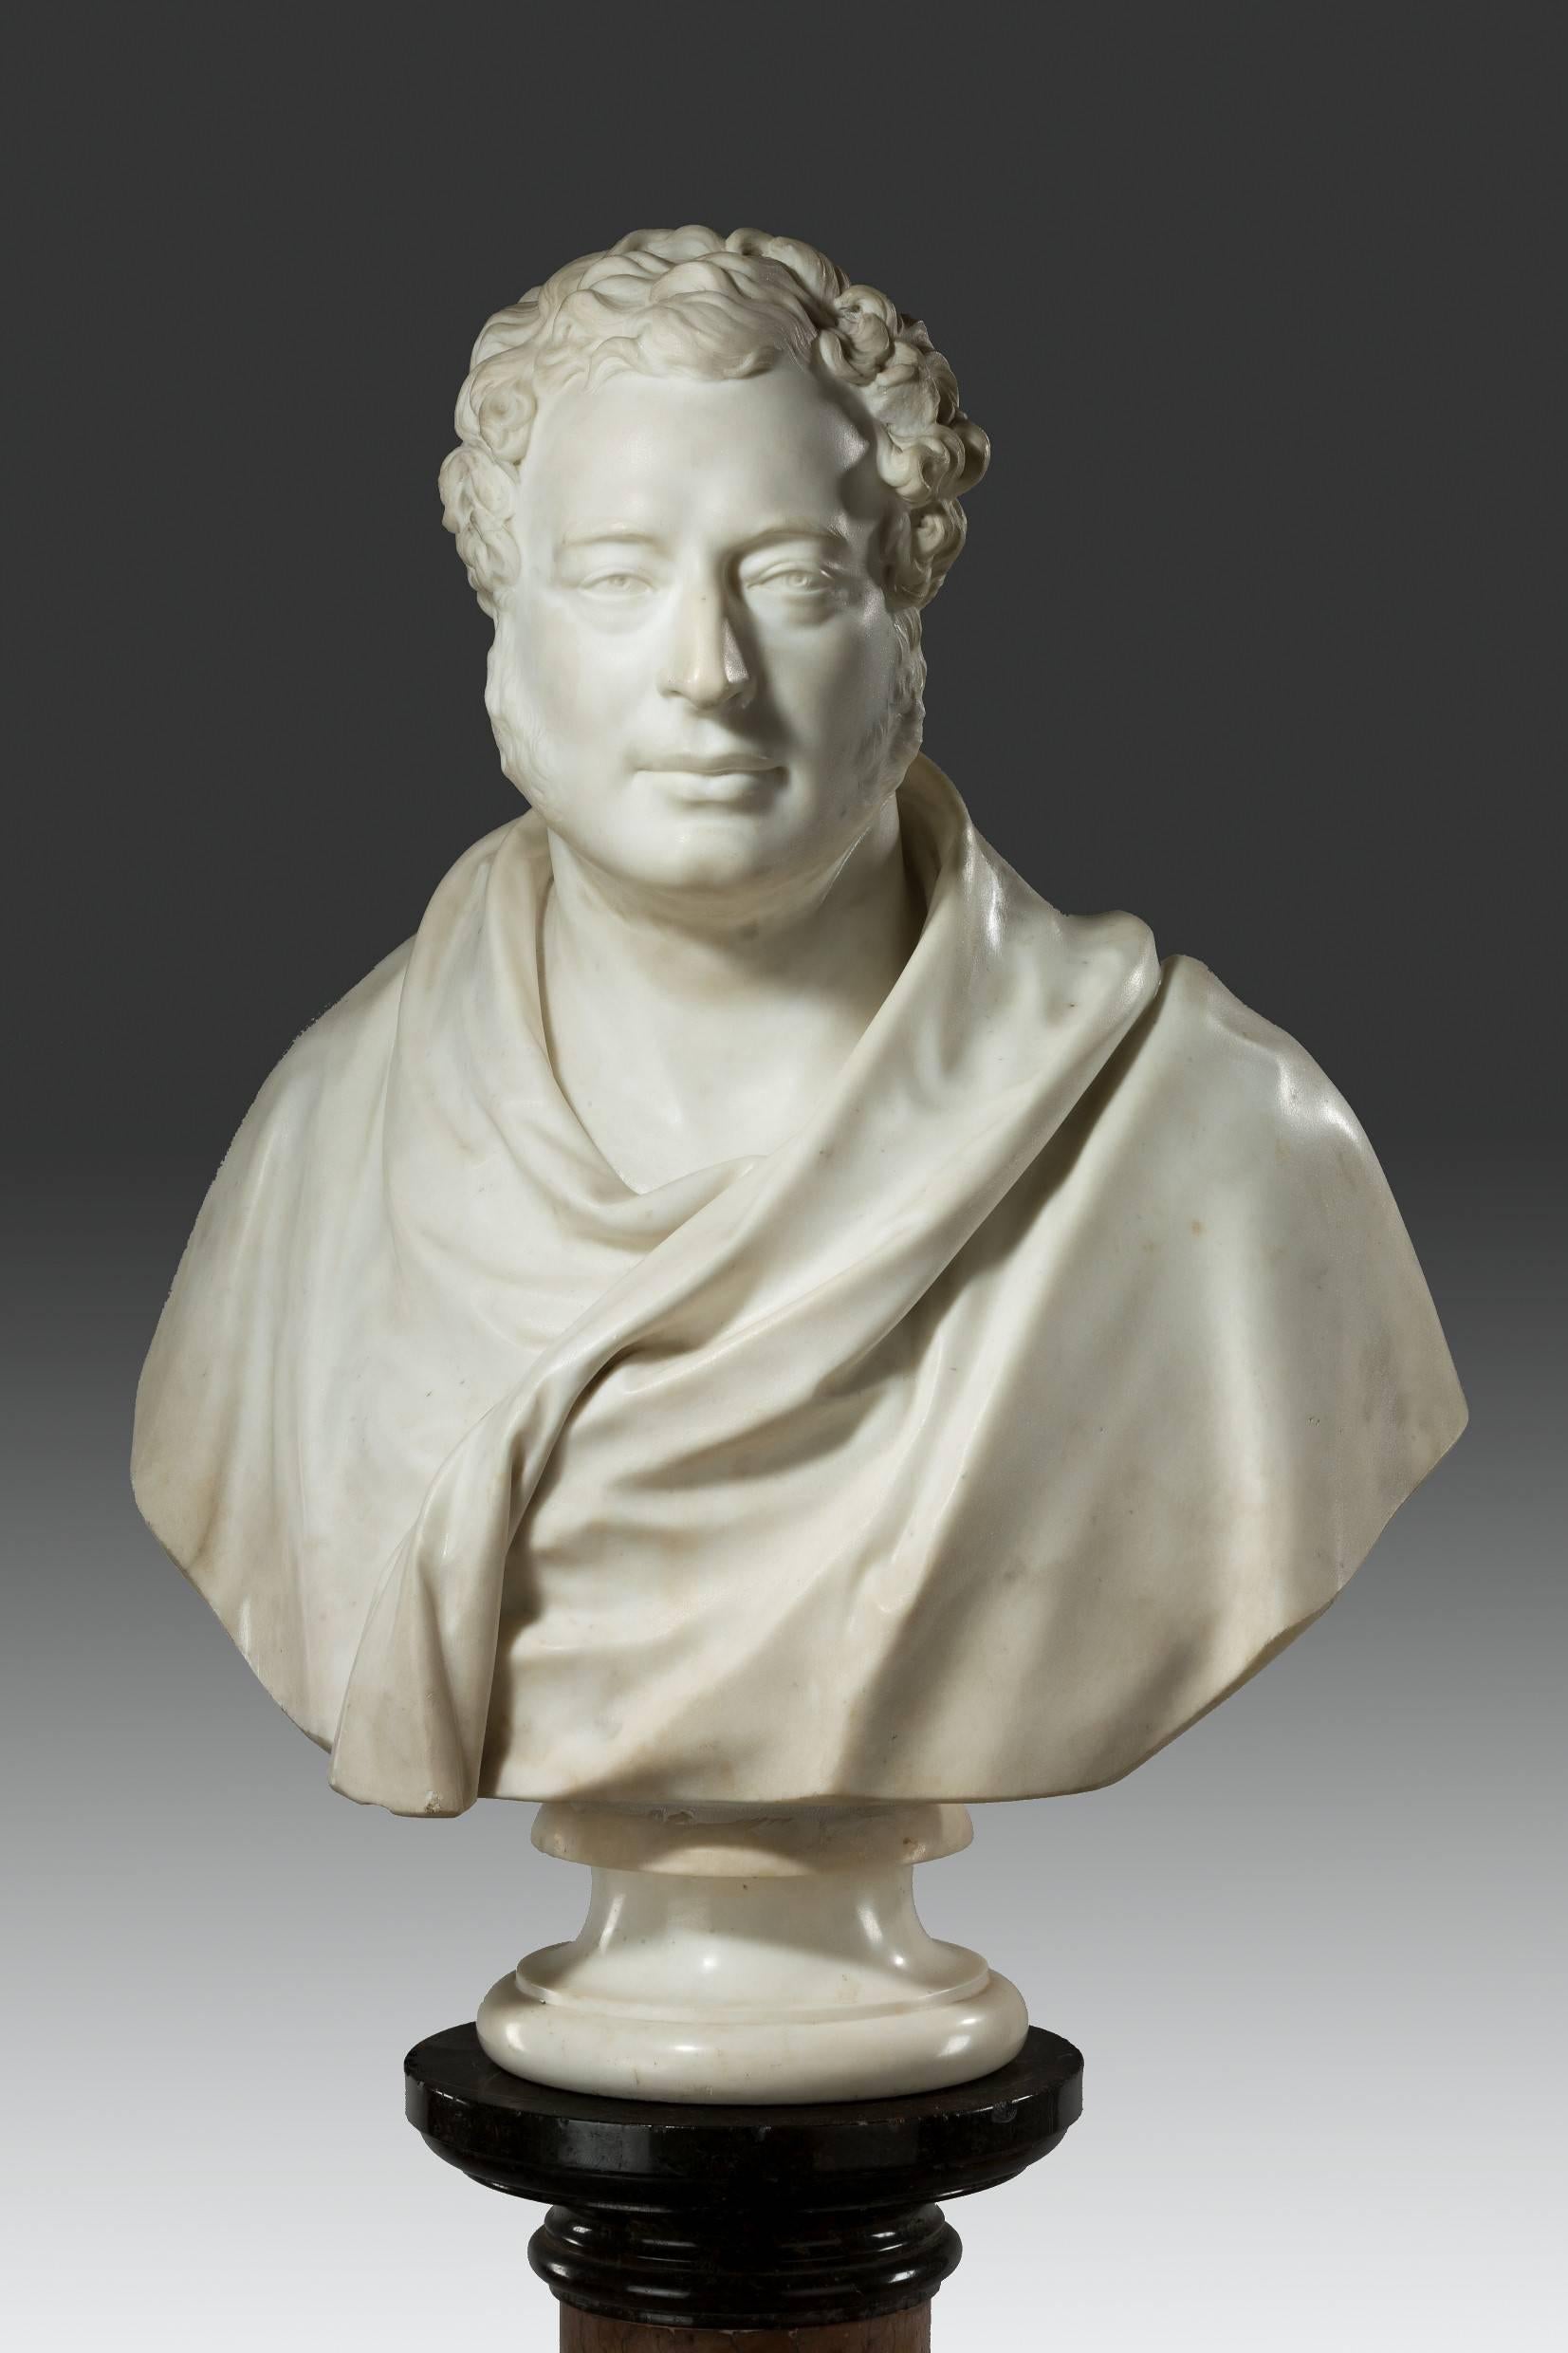 Of lifesize and in very good condition, this marble bust dates from the first half of the 19th century. Whilst the figure is not known, from the quality of sculpture and bust size, he would have been an important figure - most likely in the